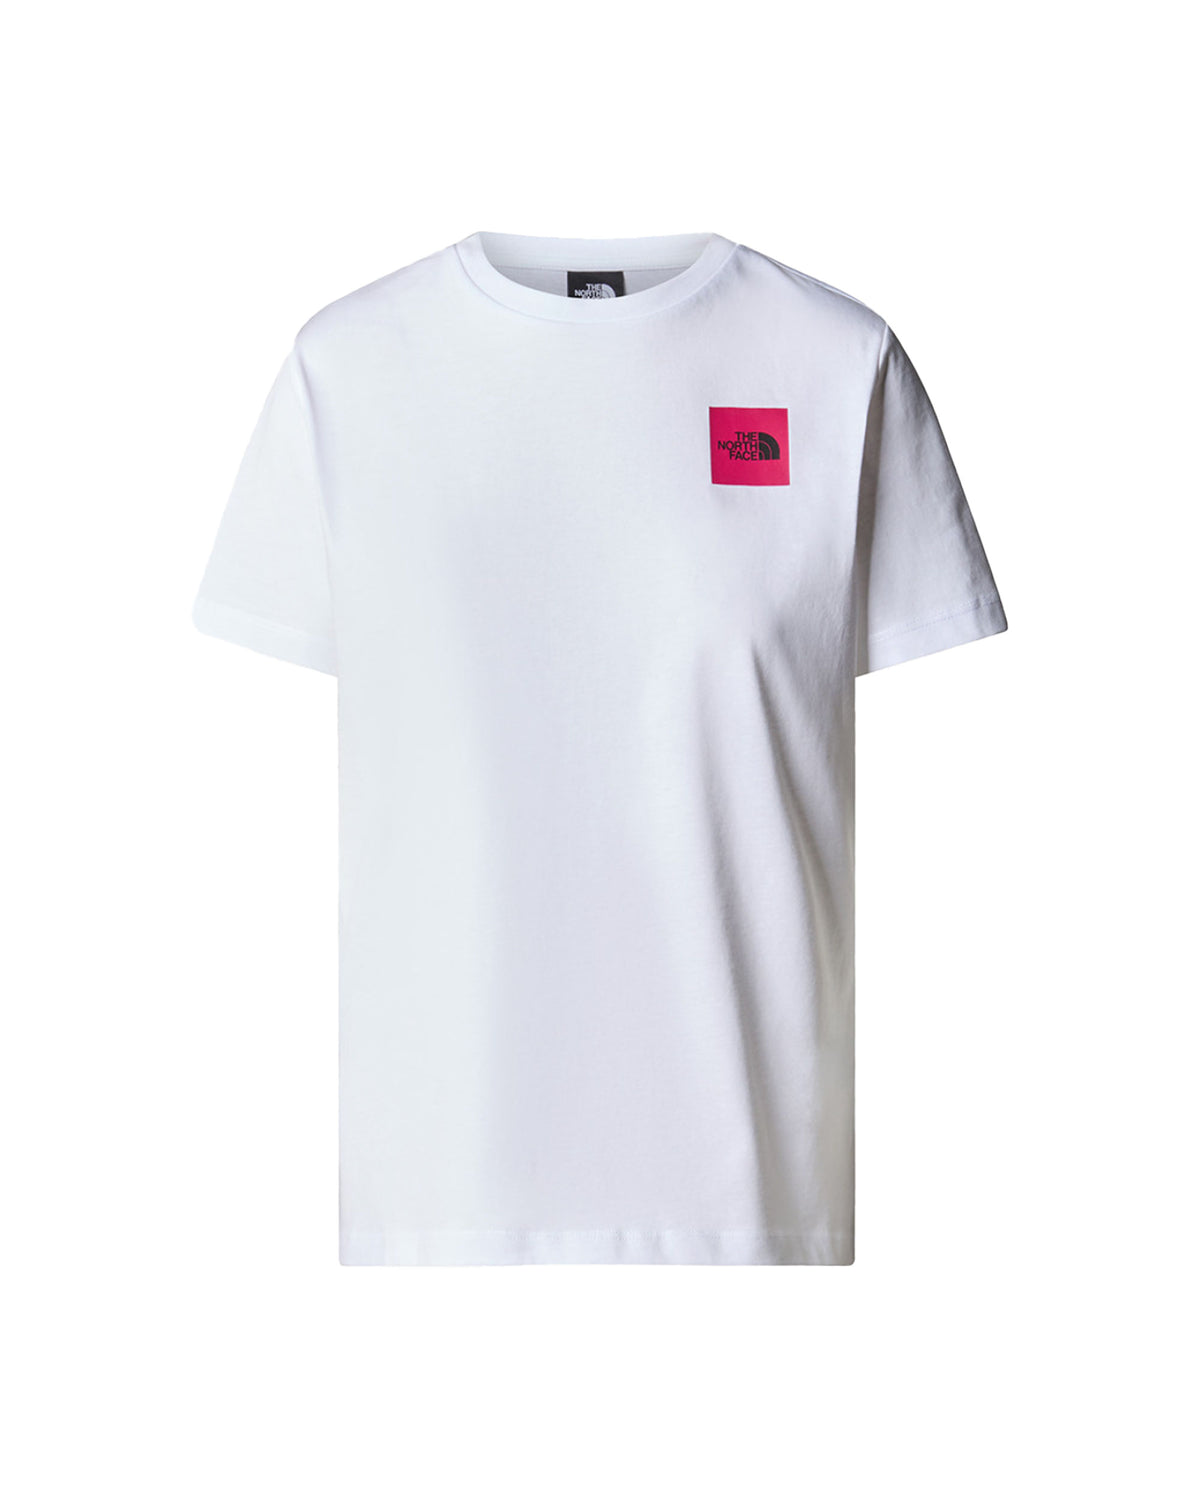 T-Shirt Donna The North Face Coordinate Bianco